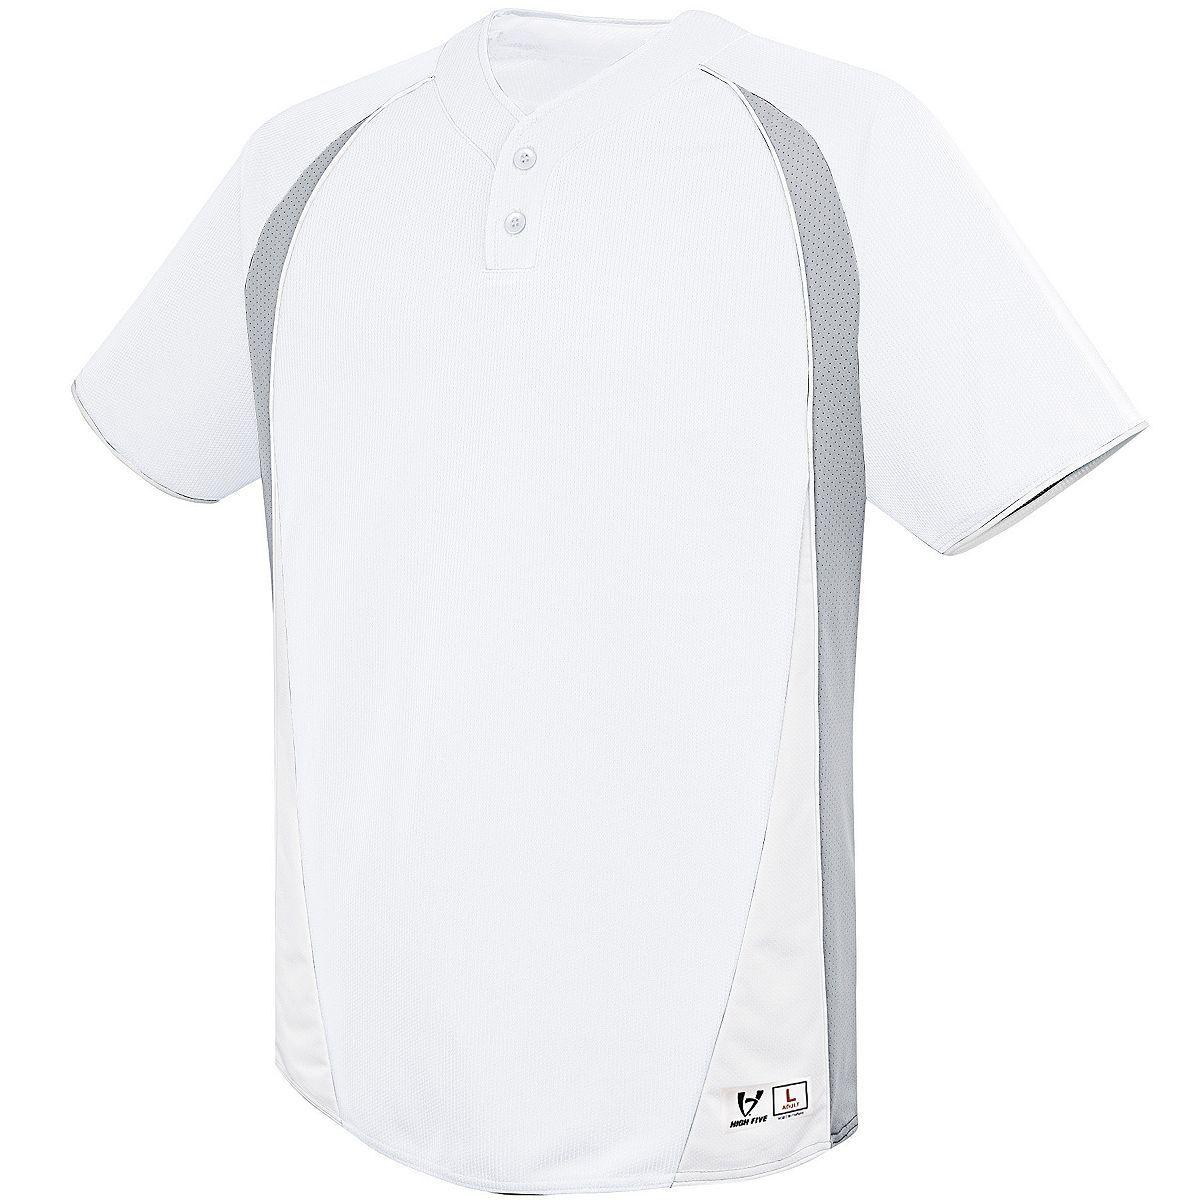 Augusta Sportswear Ace Two-Button Jersey in White/Silver Grey/White  -Part of the Adult, Adult-Jersey, Augusta-Products, Baseball, Shirts, All-Sports, All-Sports-1 product lines at KanaleyCreations.com